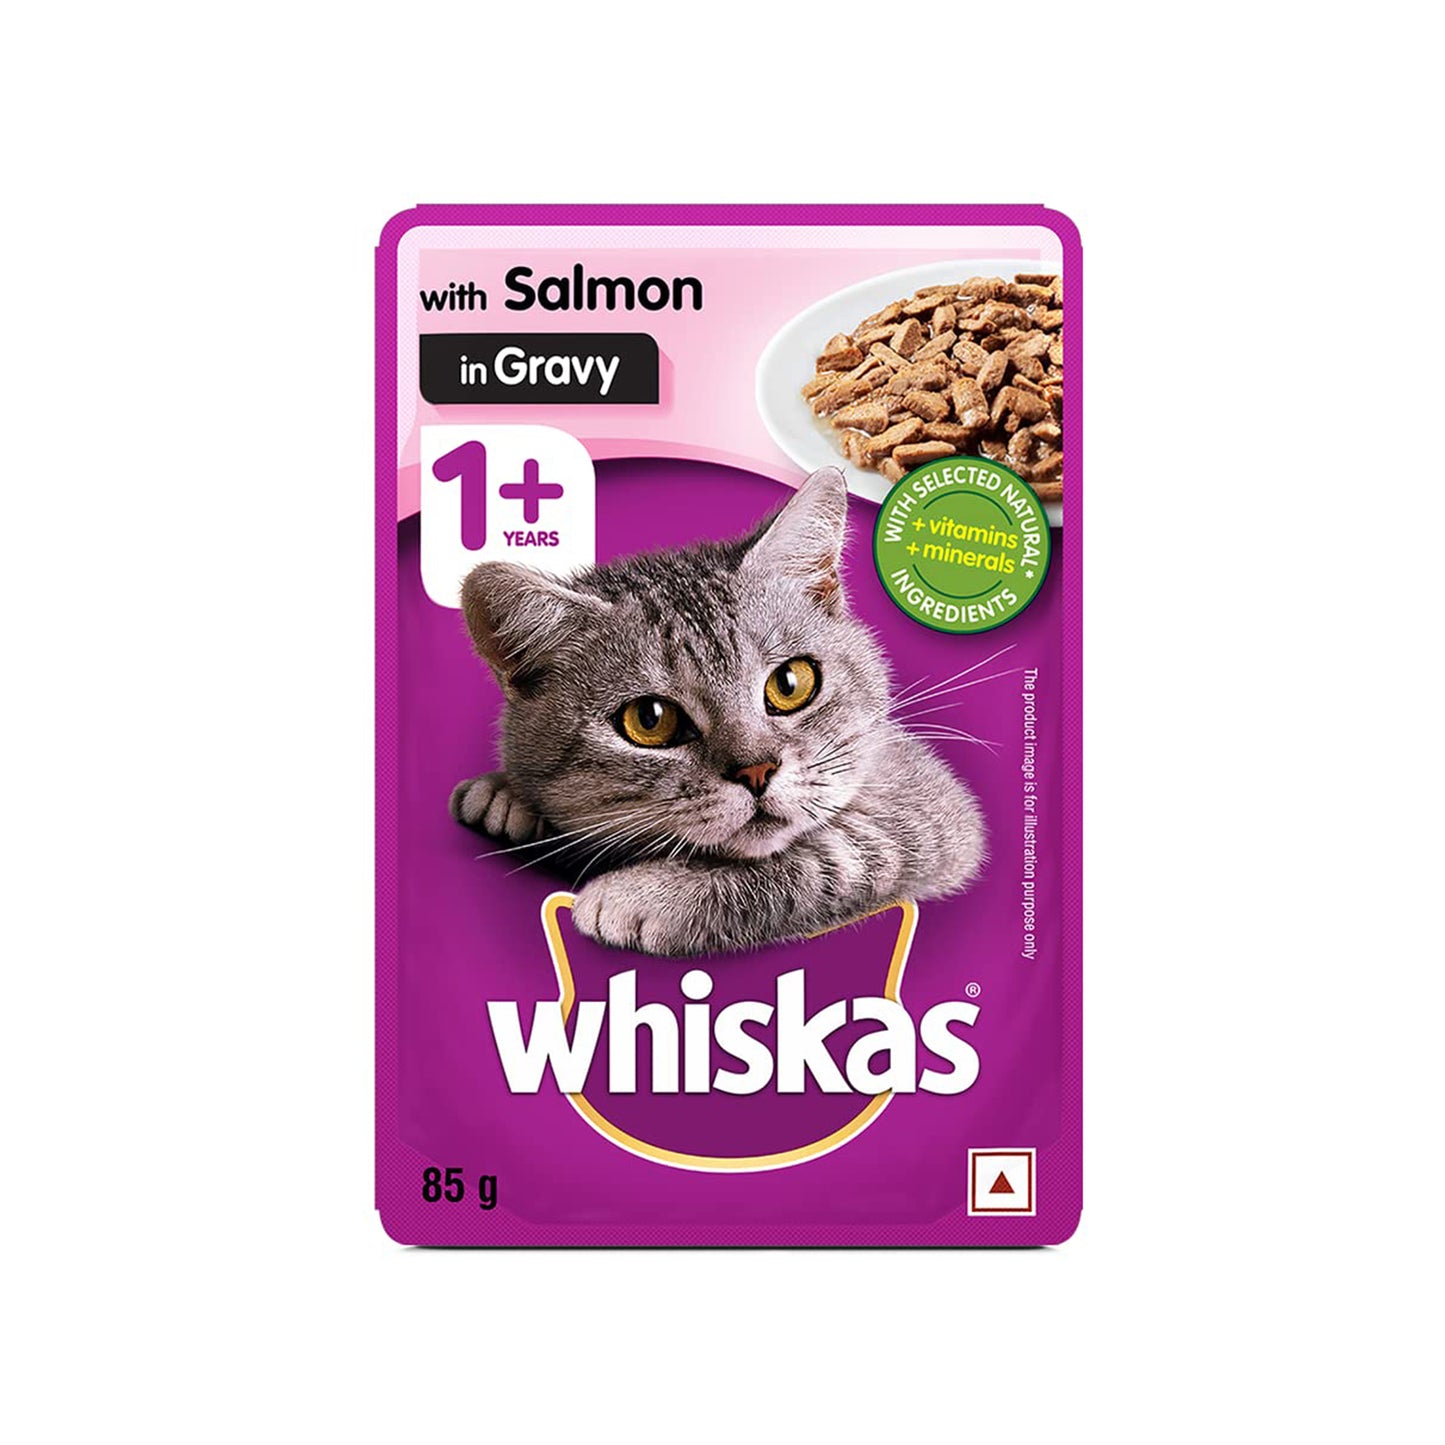 Whiskas - Wet Food for Adult Cats (1+Years) | Salmon in Gravy Flavour Pouch